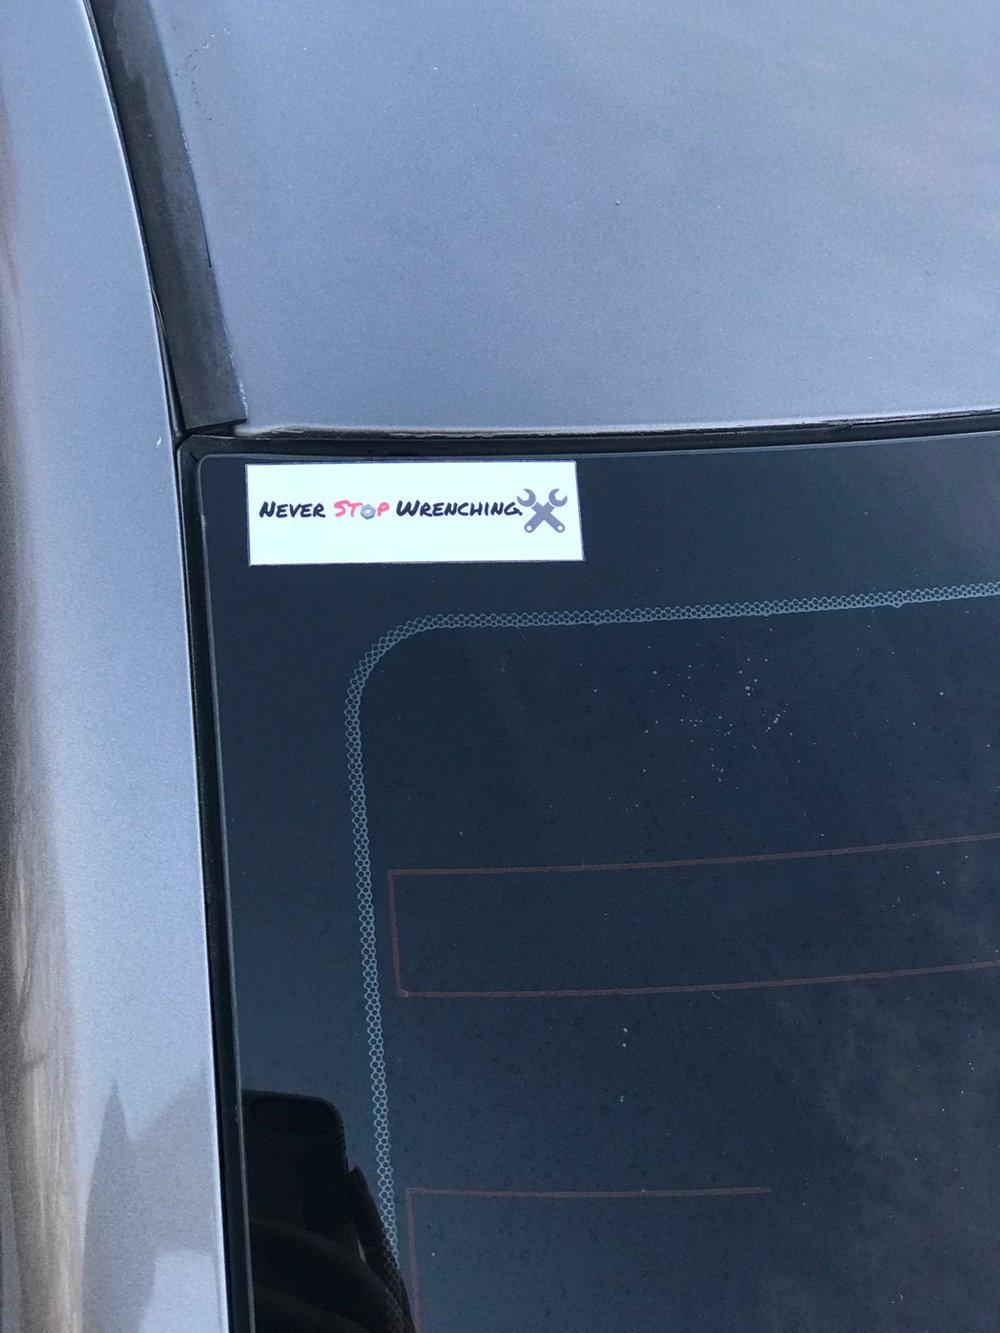 Image of Never Stop Wrenching Sticker